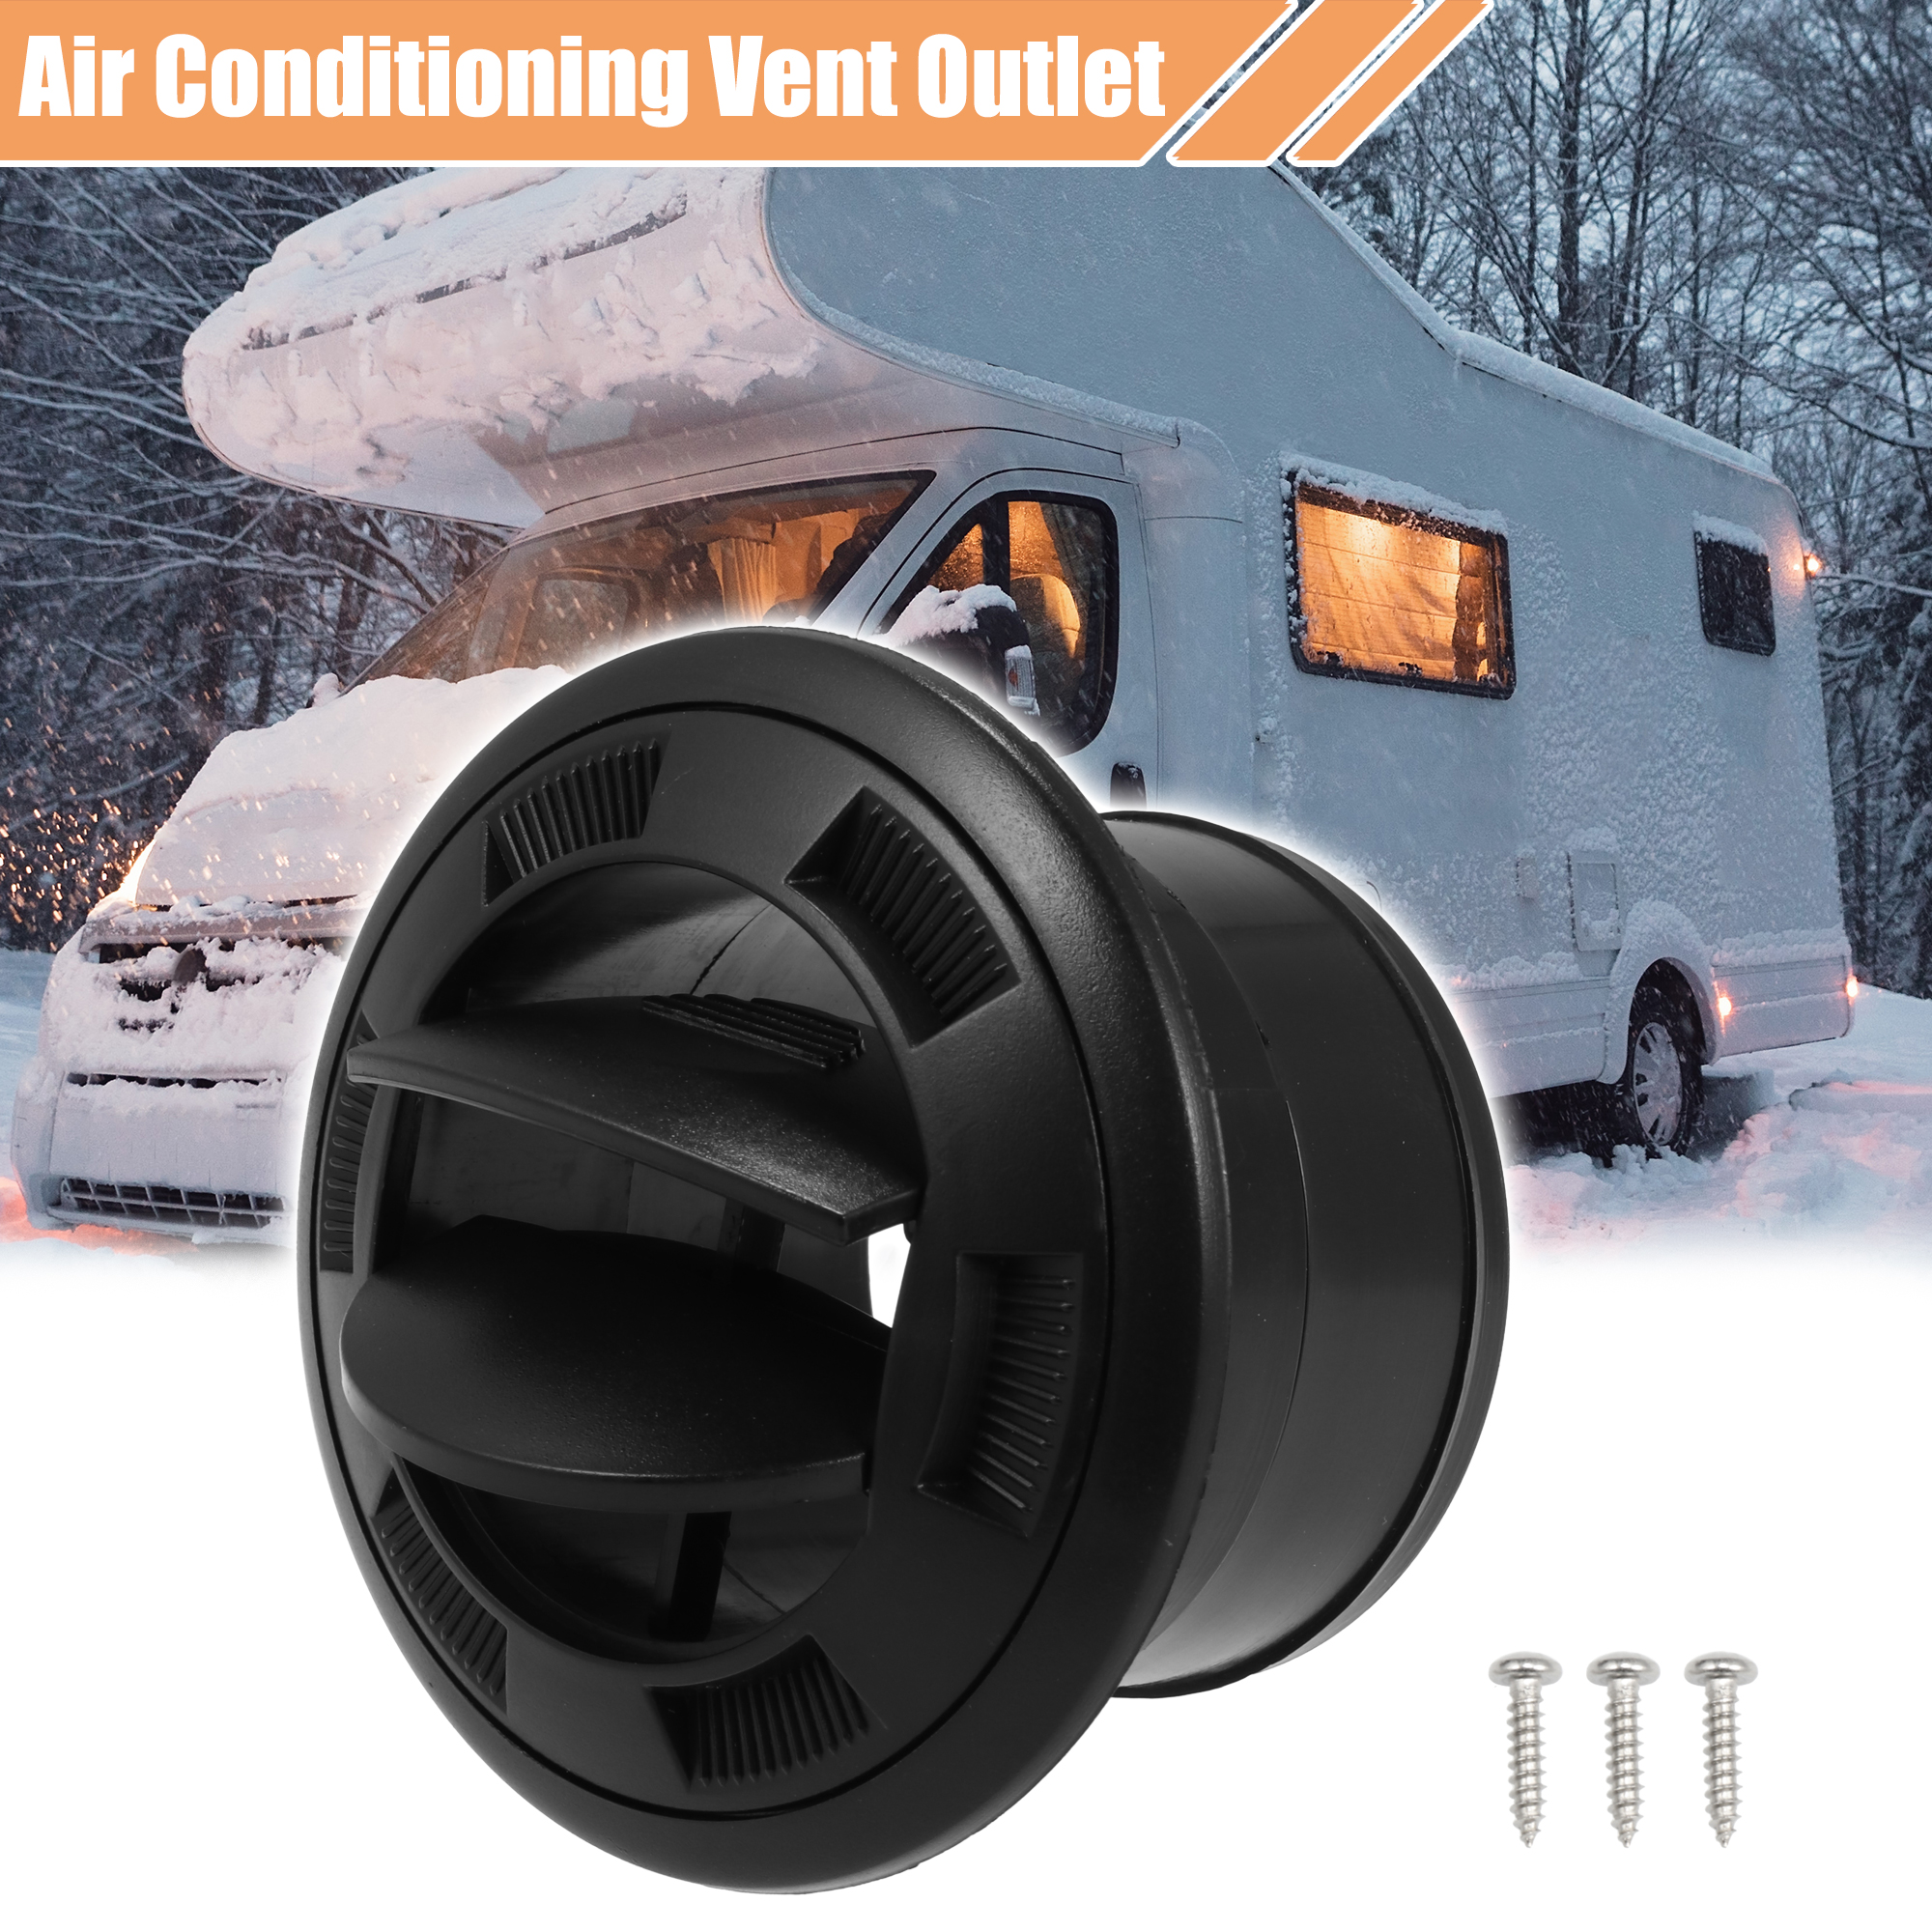 Unique Bargains 75mm Air Conditioning Vent Deflector Outlet Louvered Kit for RV without Grille